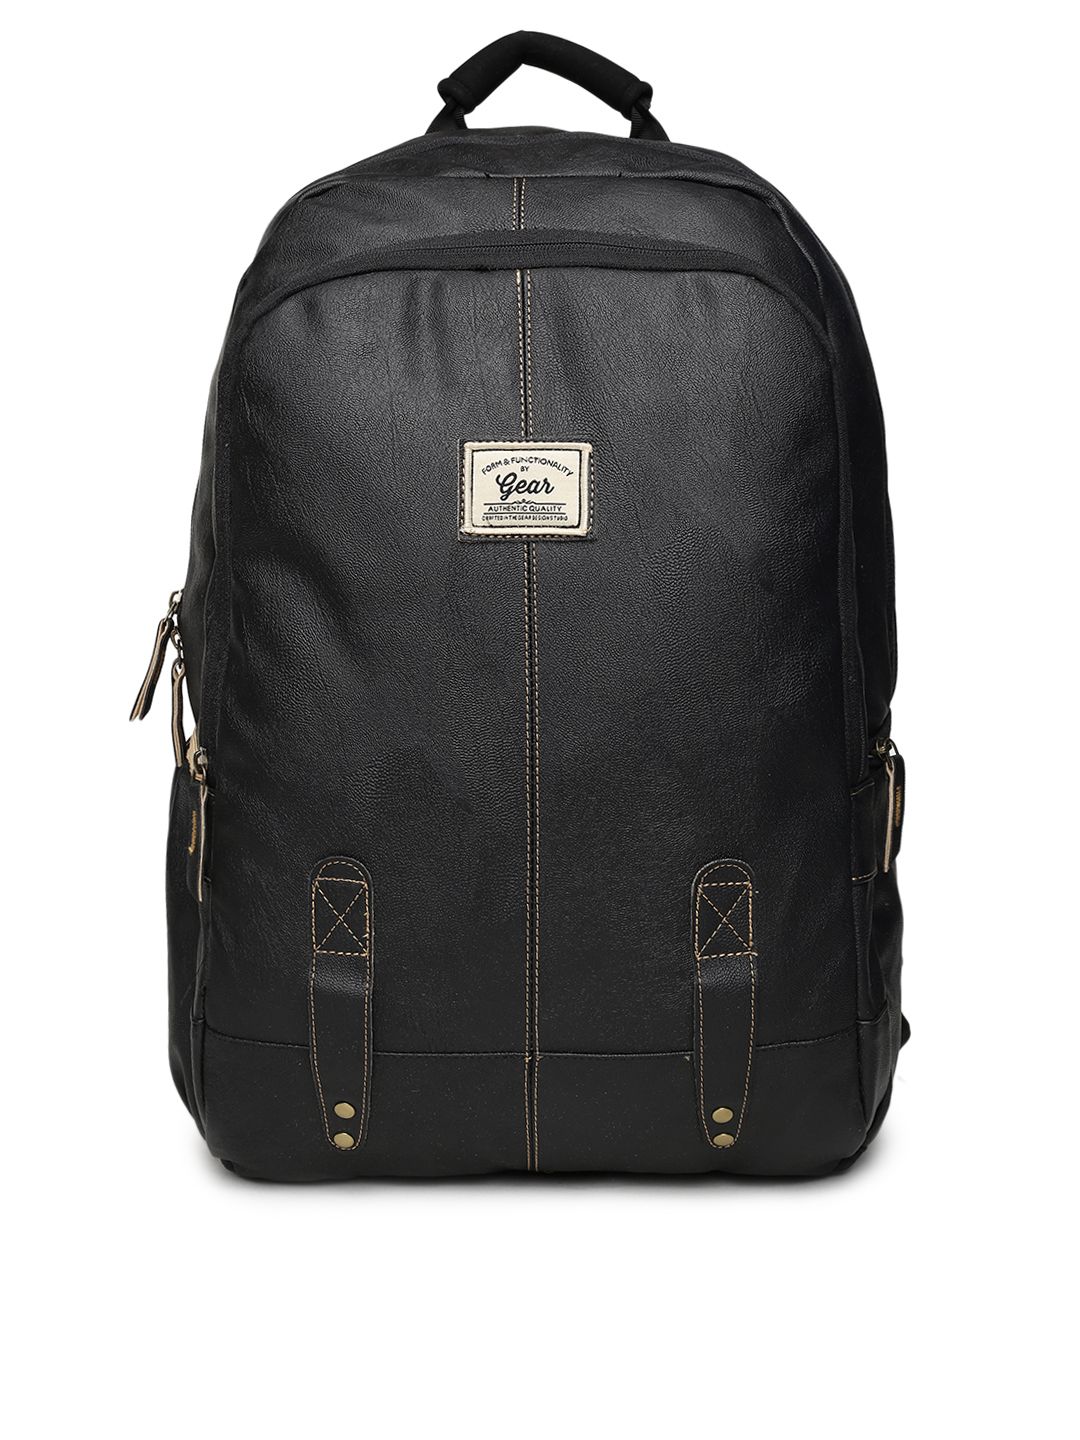 Gear Unisex Black Faux Leather Solid Backpack Price in India